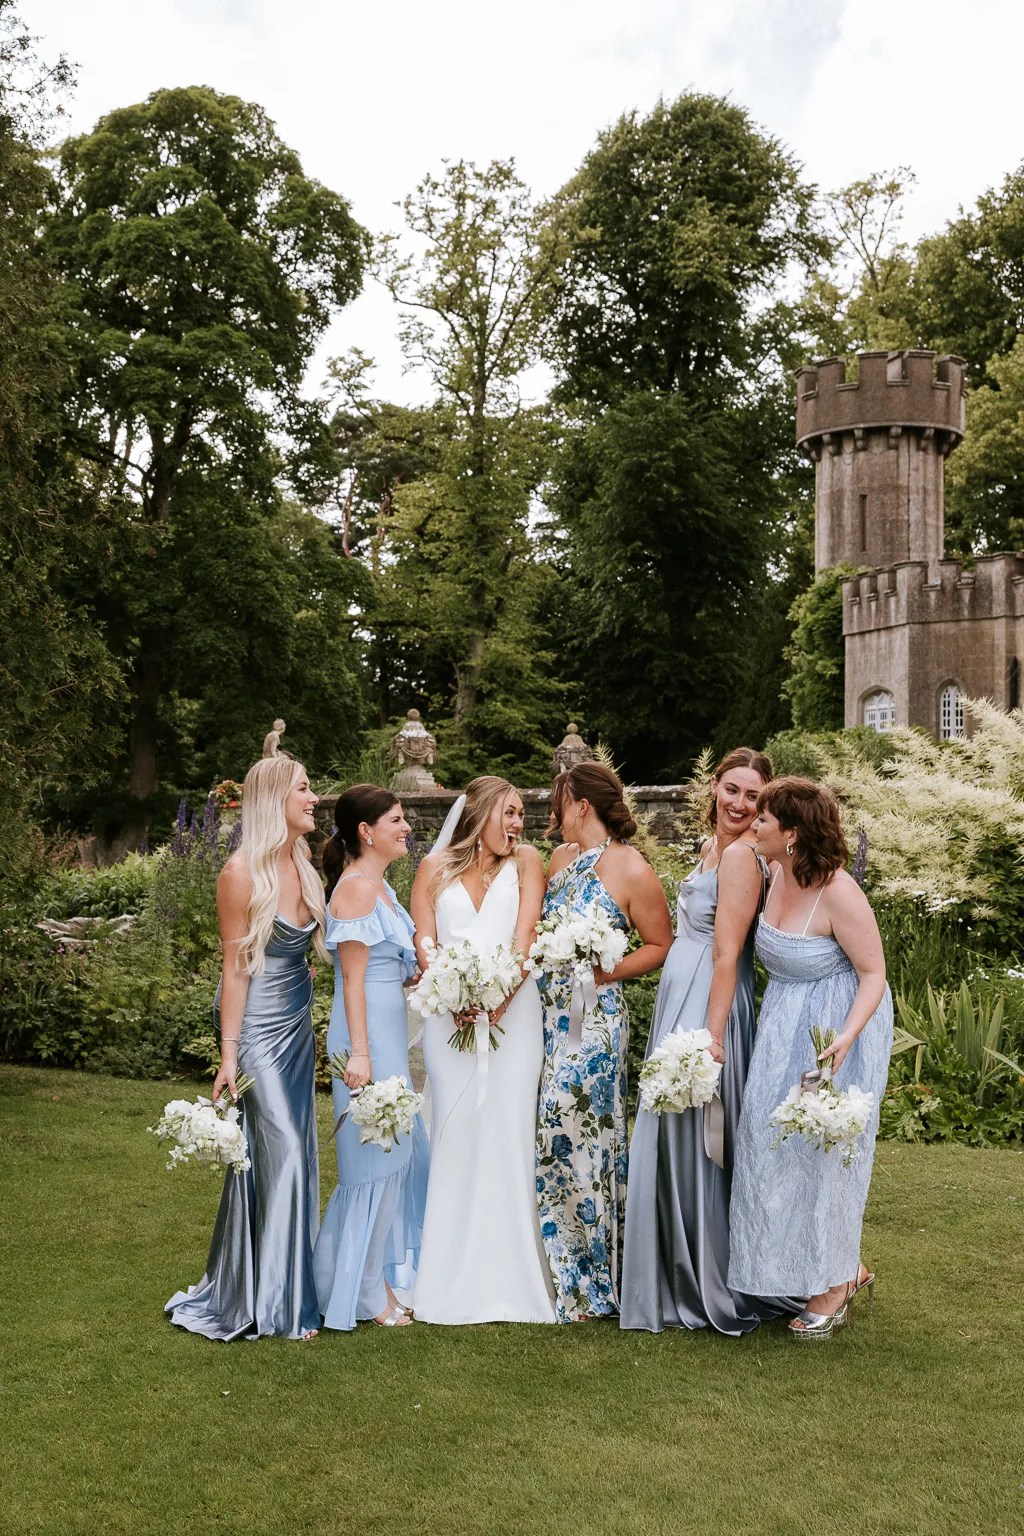 16 Bridesmaids Who Wore Mix and Match Bridesmaids Dresses